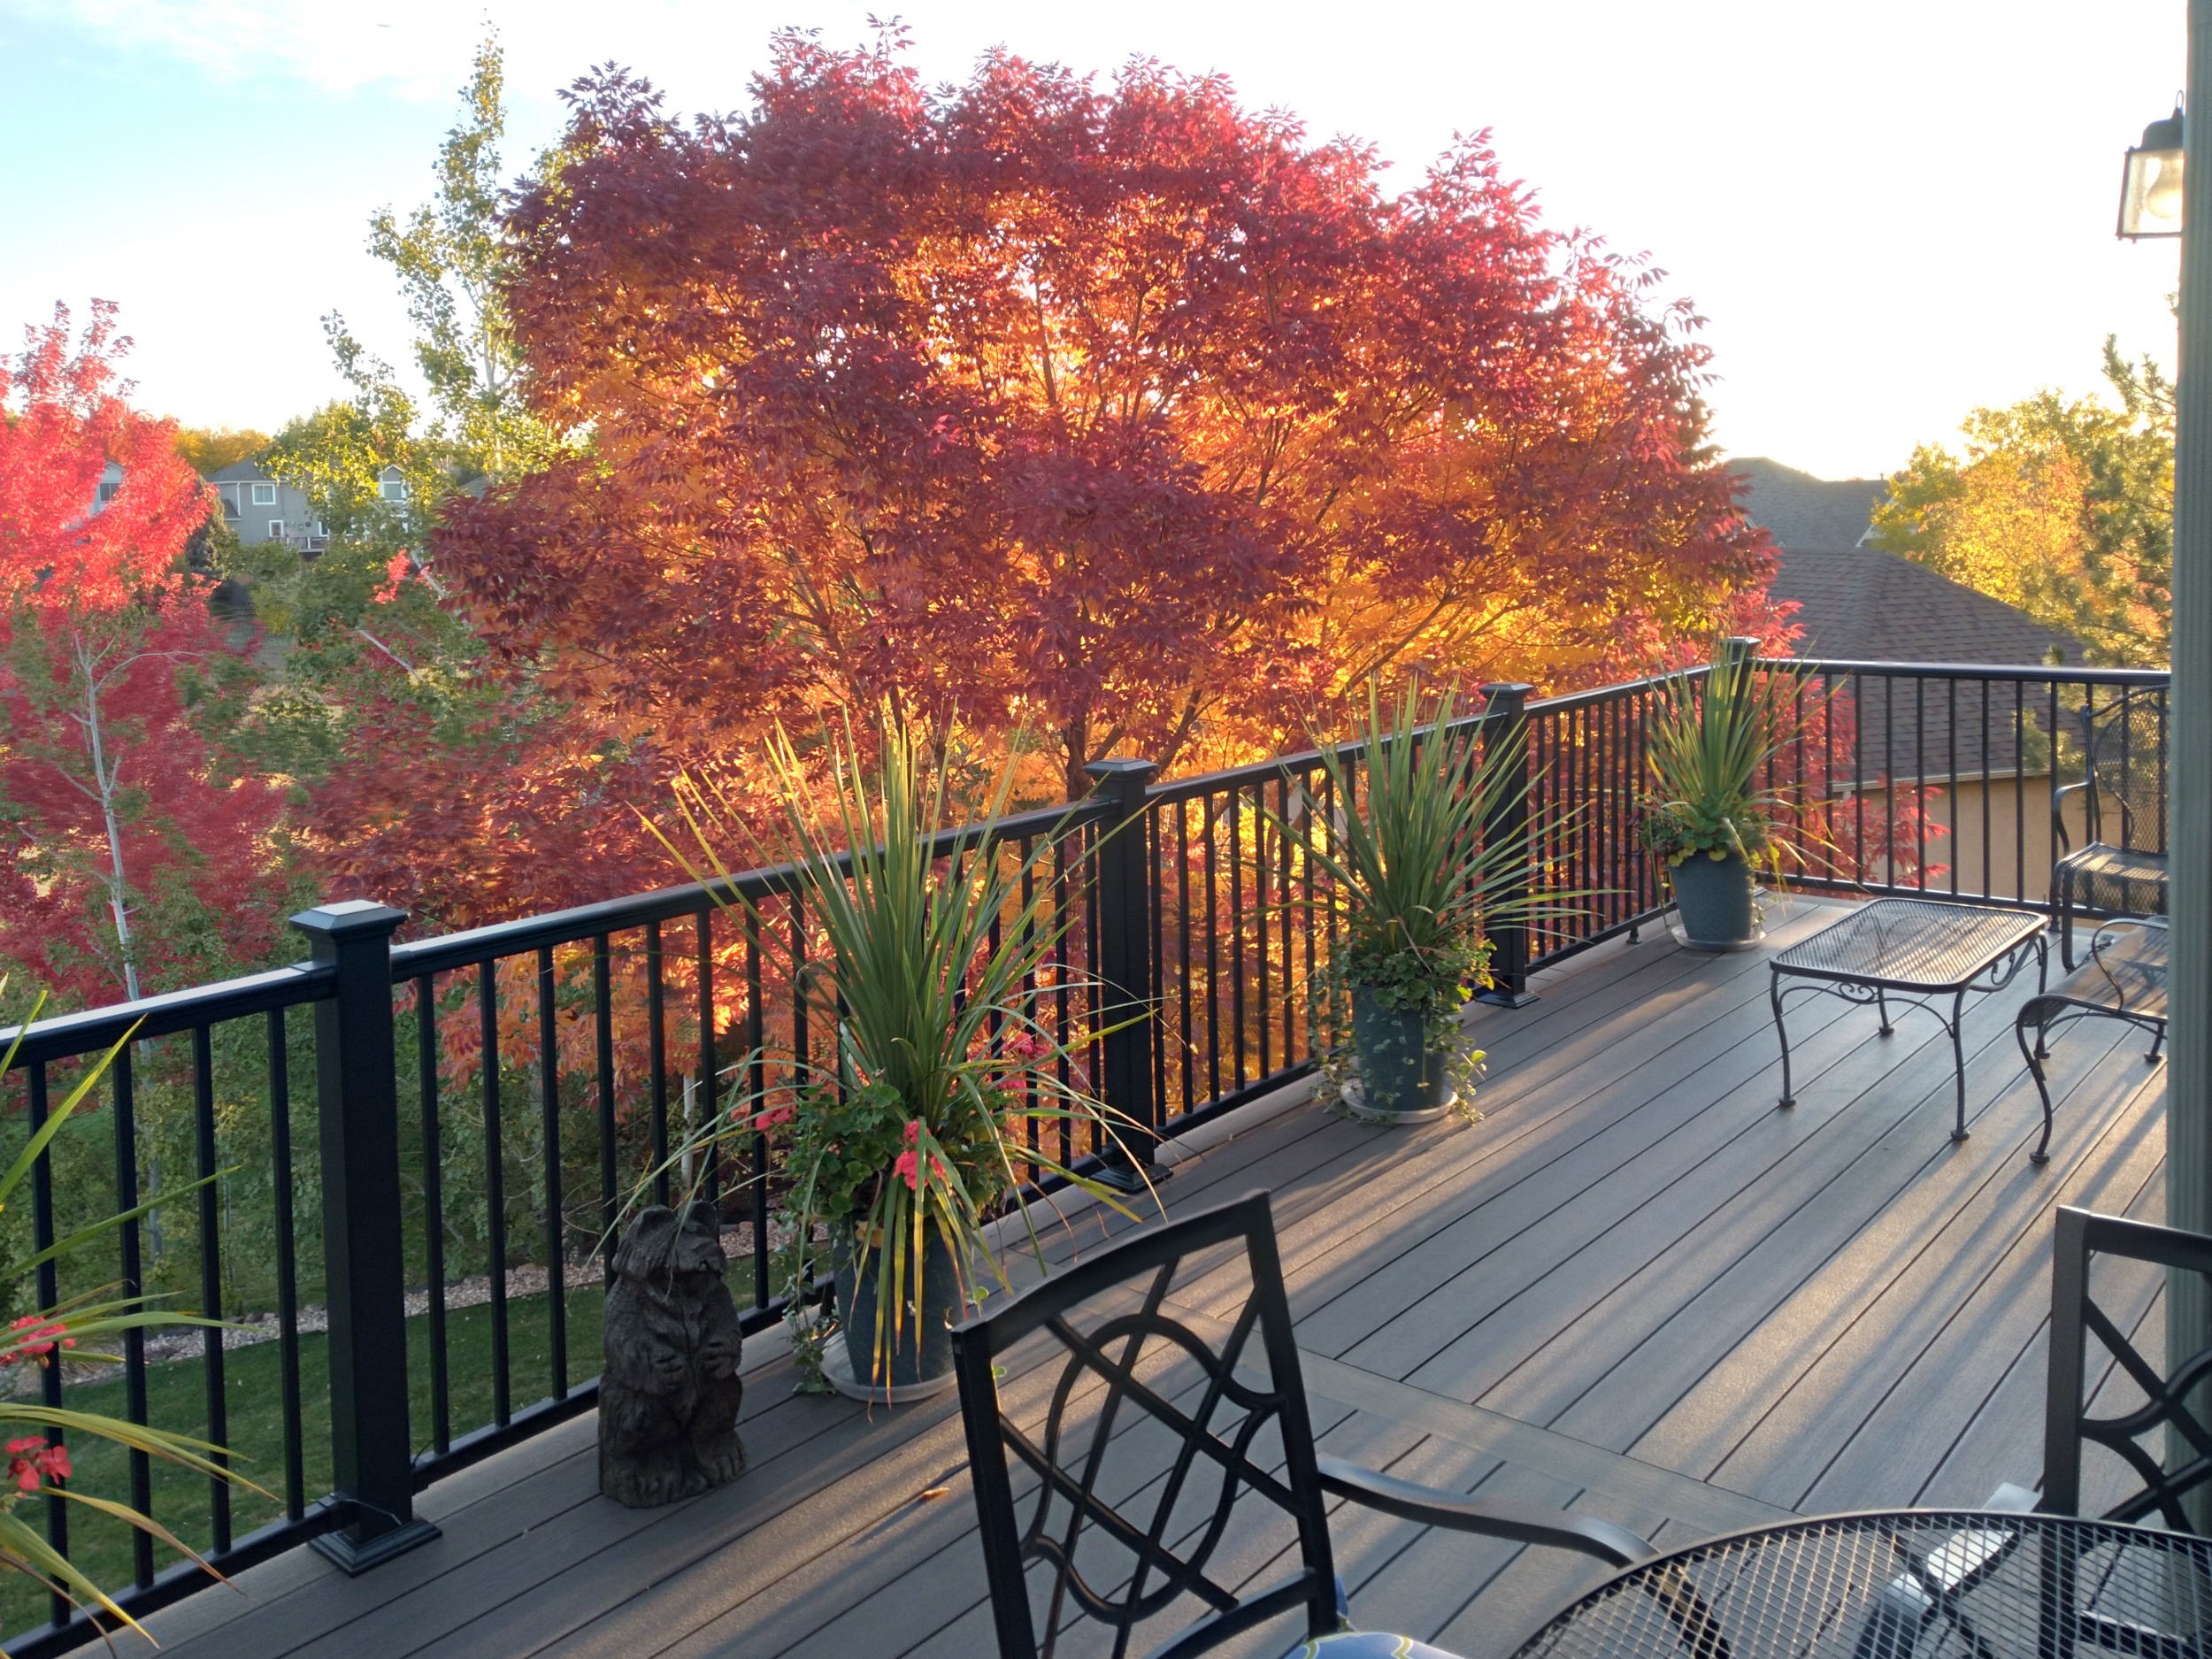 Amazing autumn views from deck